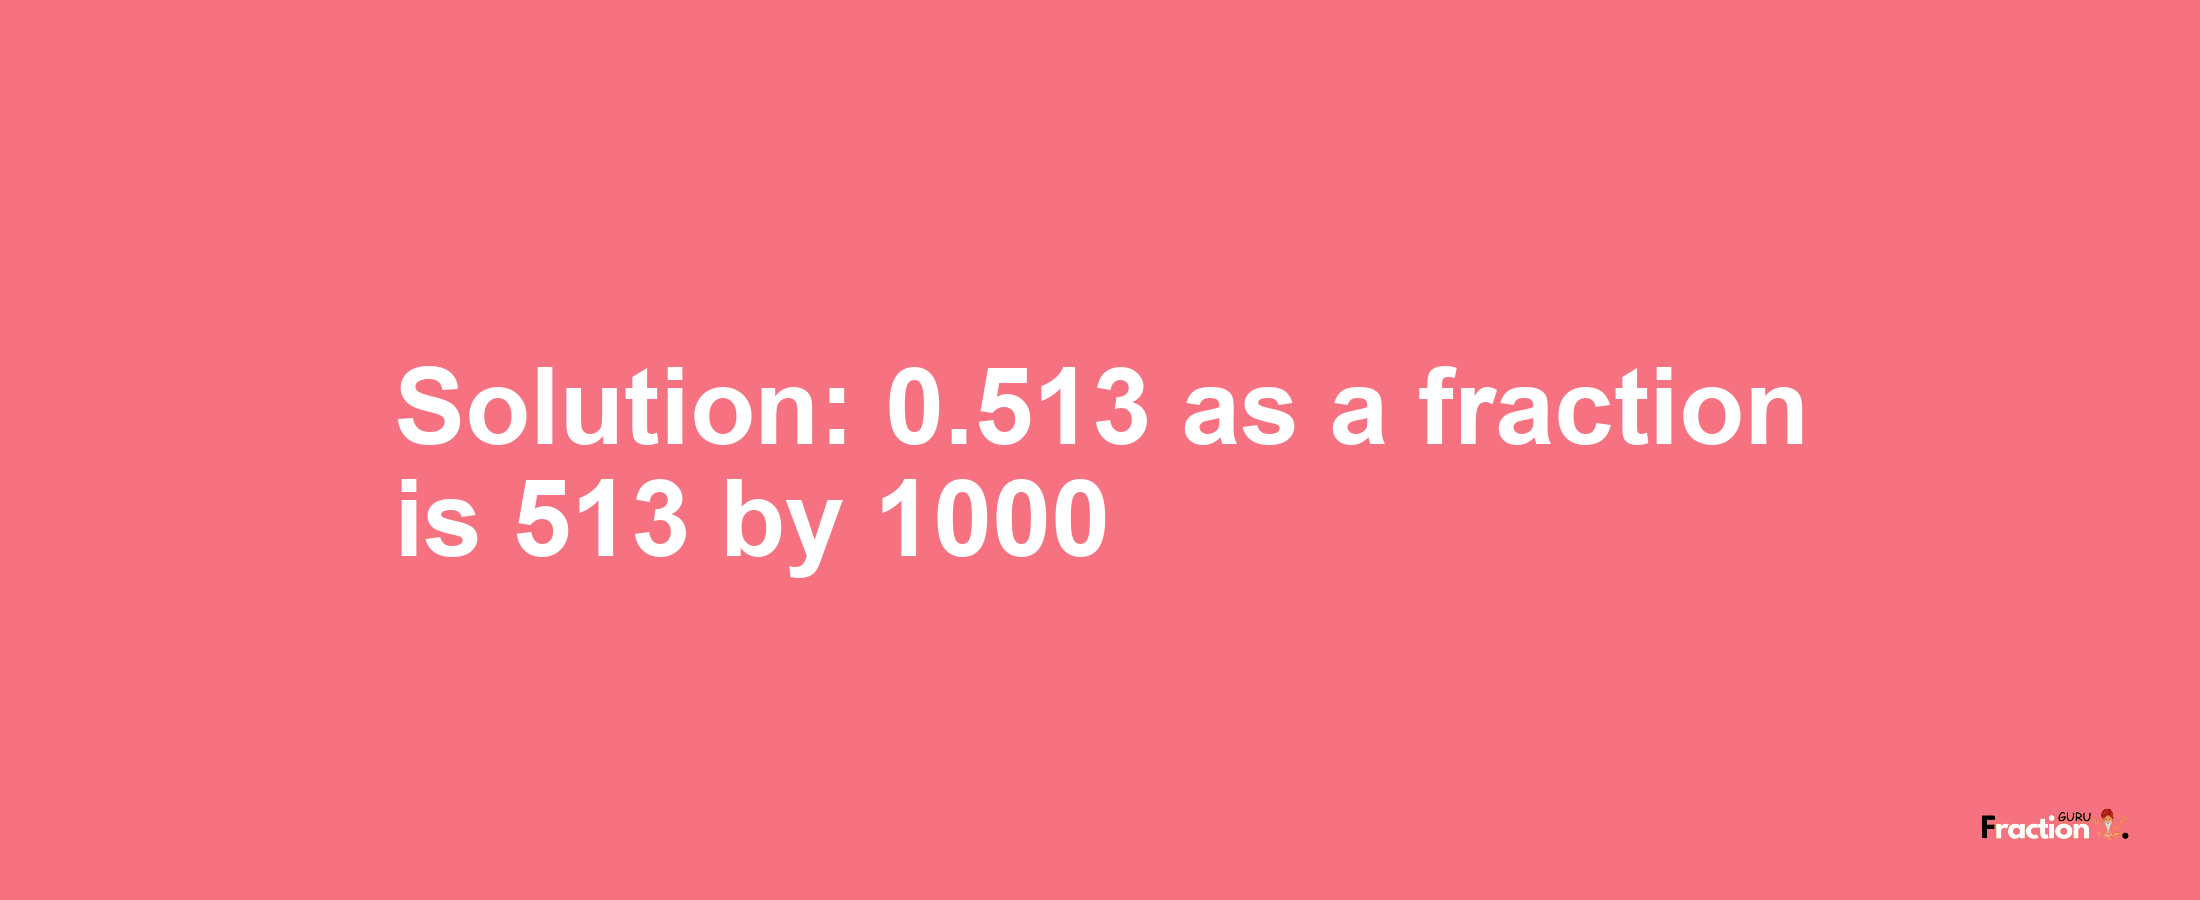 Solution:0.513 as a fraction is 513/1000